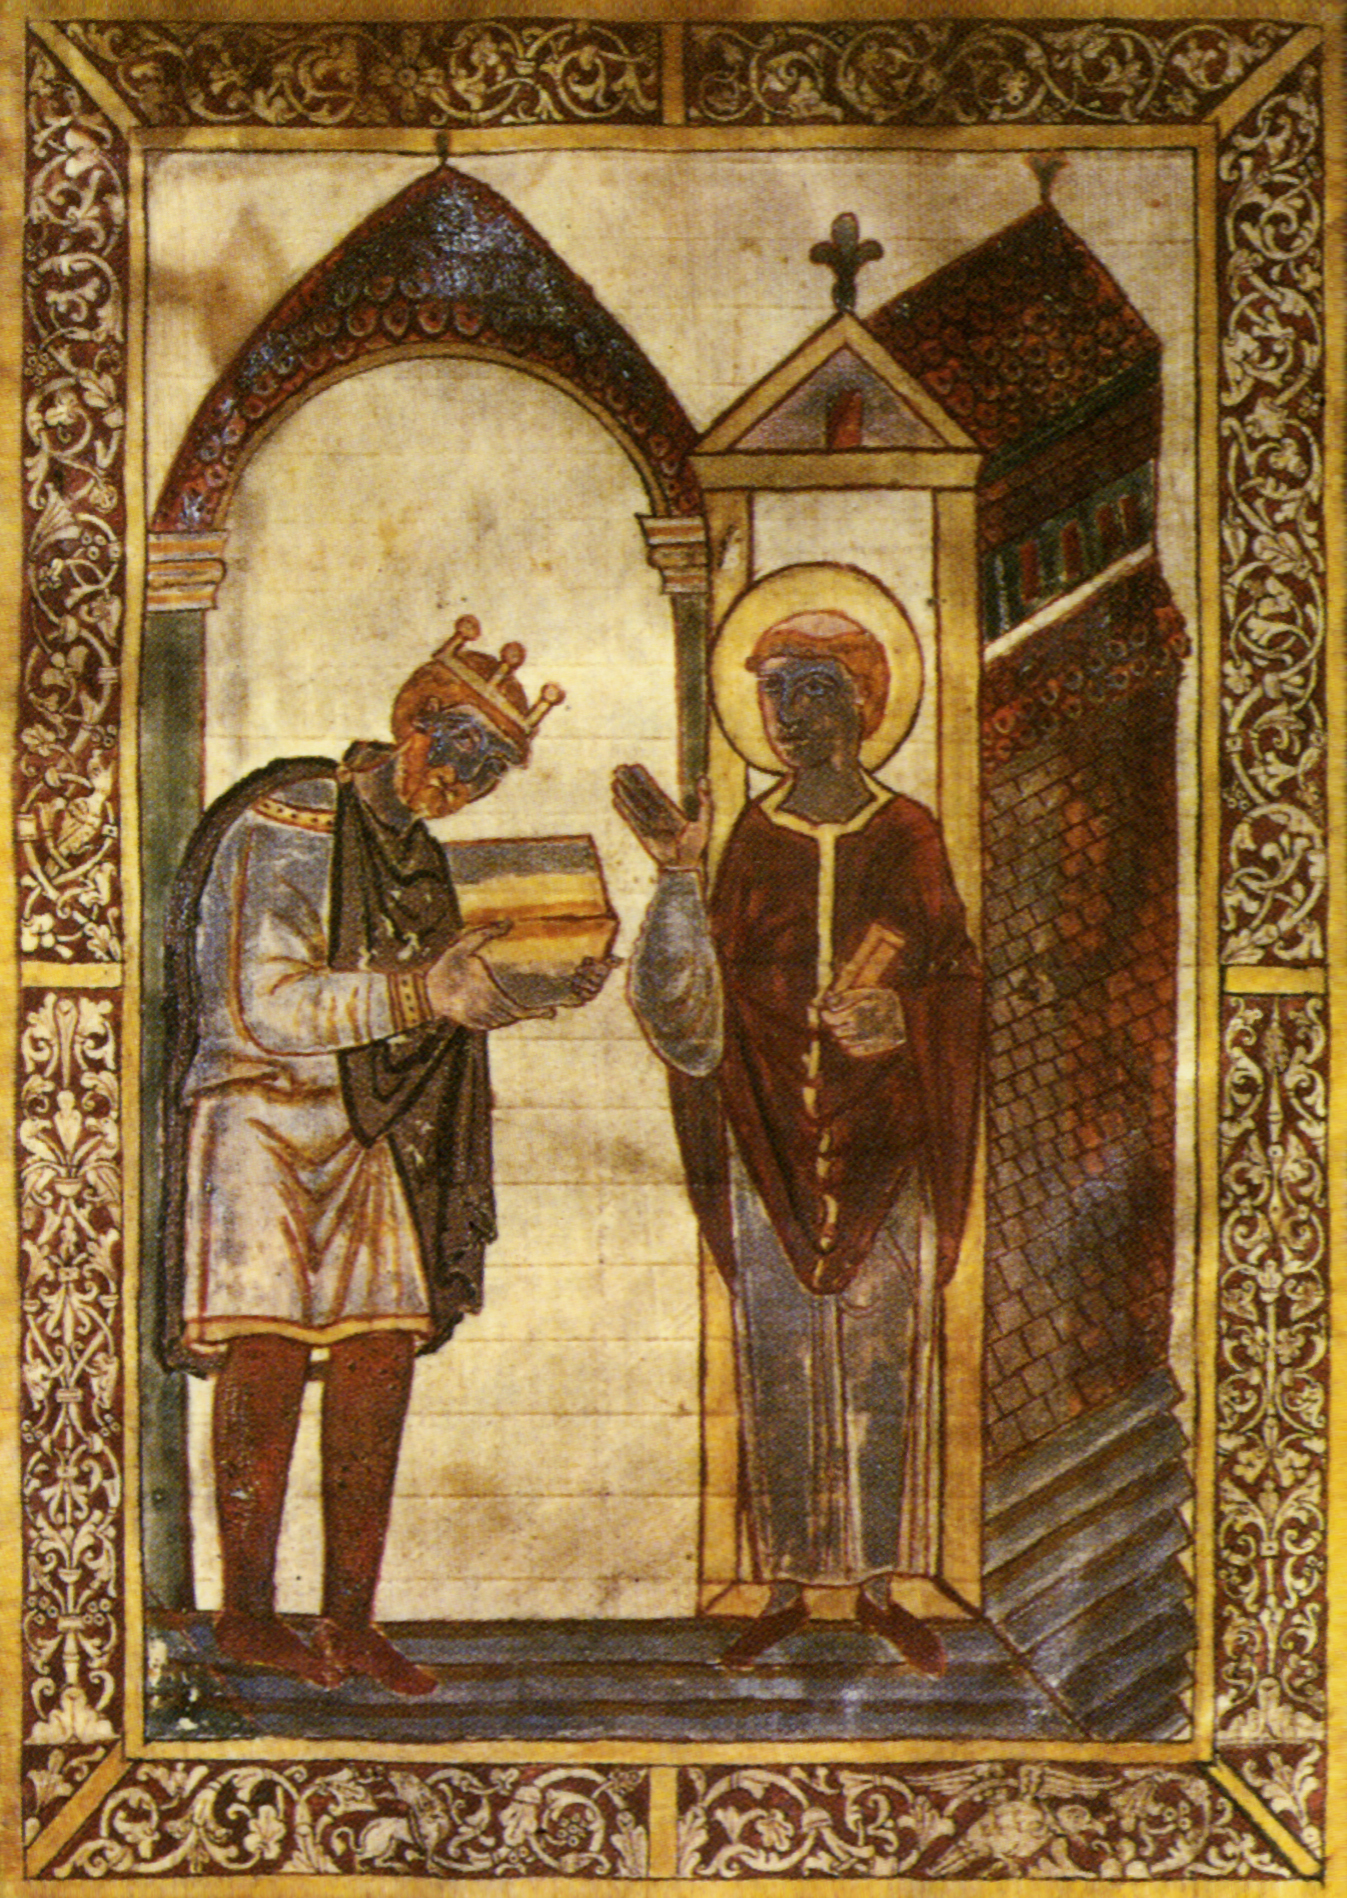 Frontispiece of Bede’s Life of St. Cuthbert by Unknown Artist - c. 930 - 29.2 X 20 cm British Museum